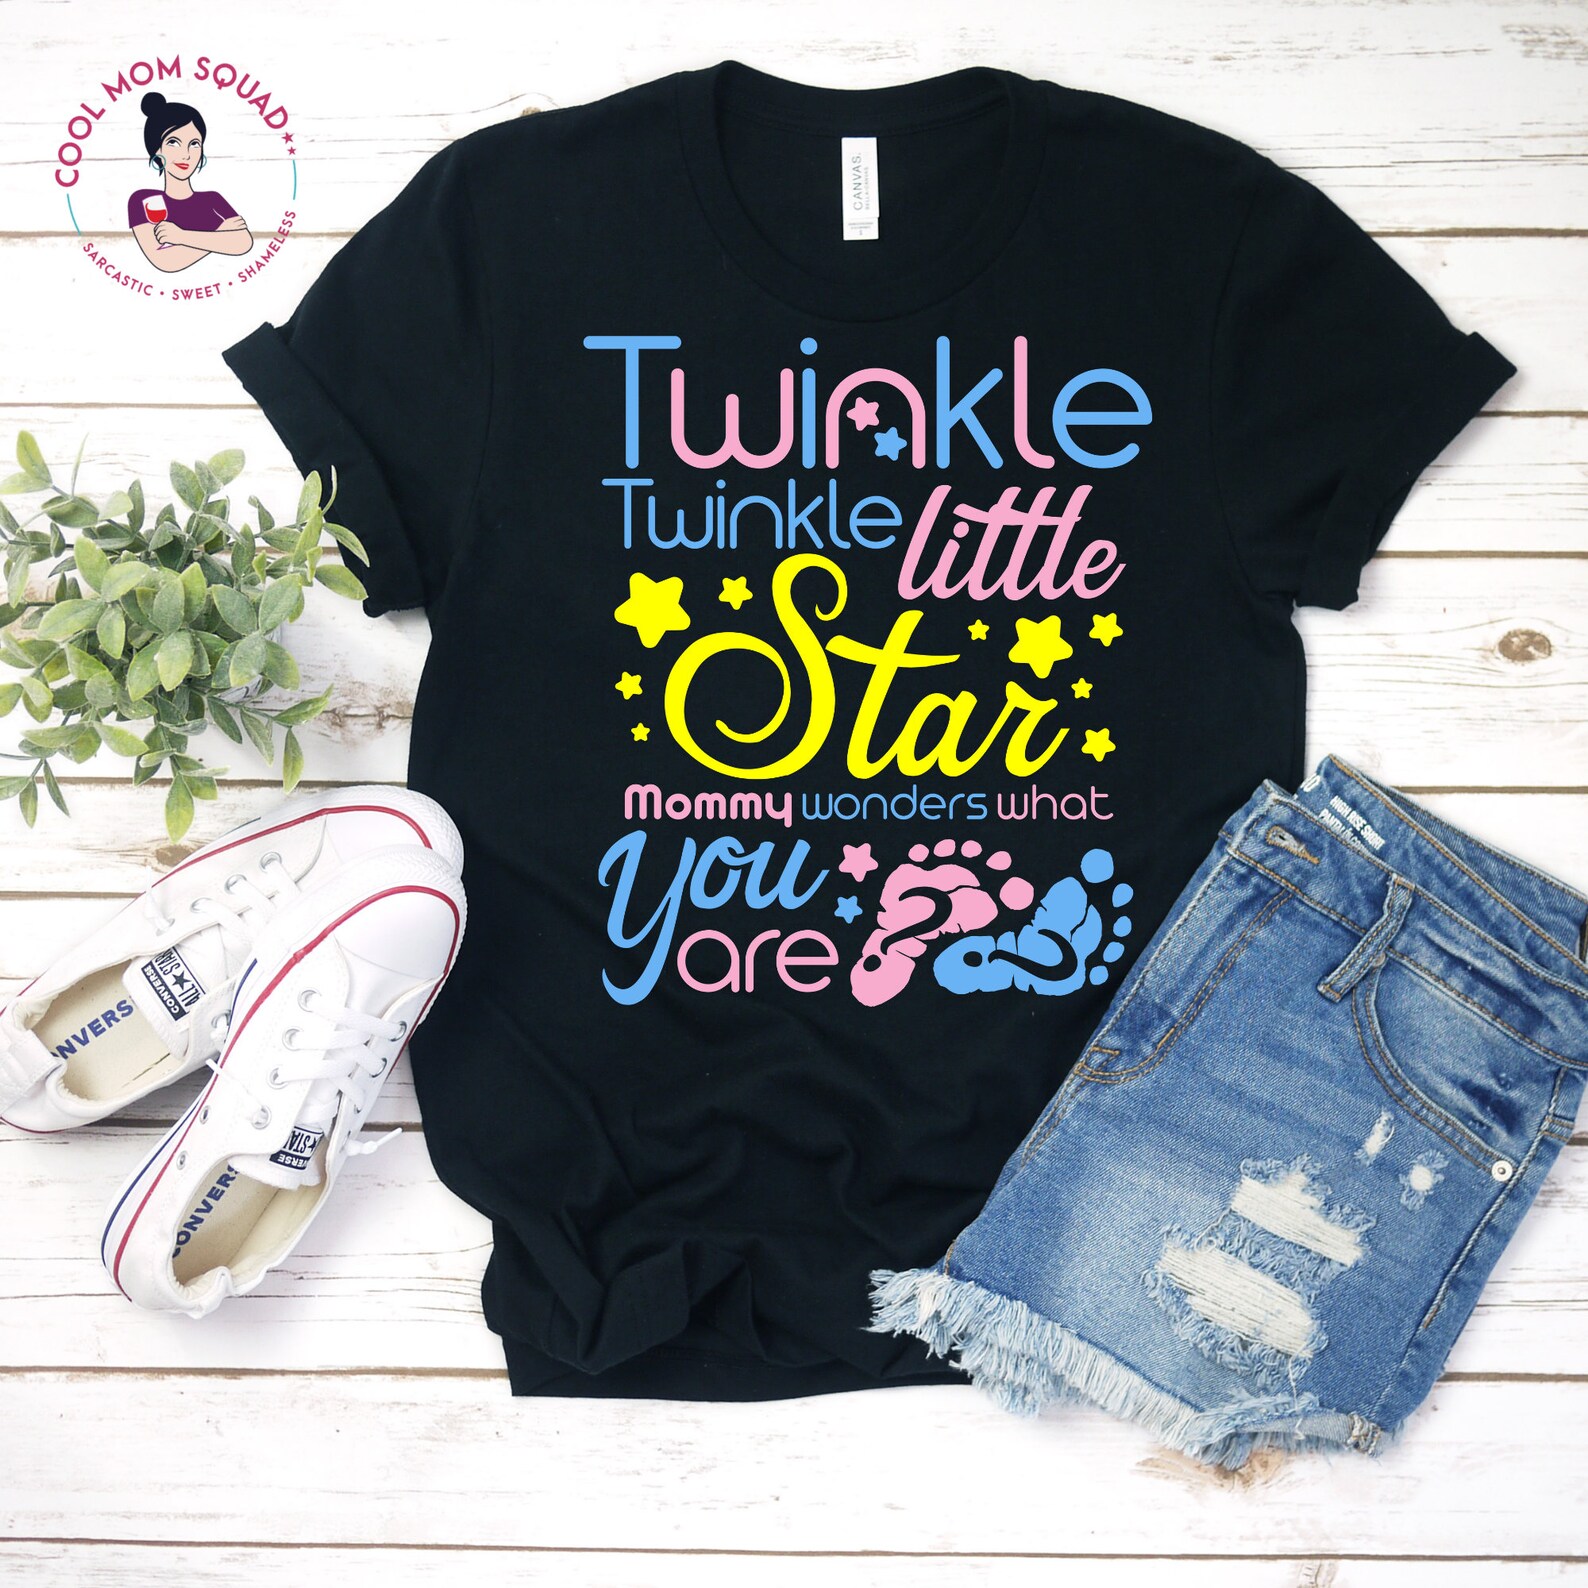 Family Gender Reveal Party Shirts Twinkle Twinkle Little Star | Etsy